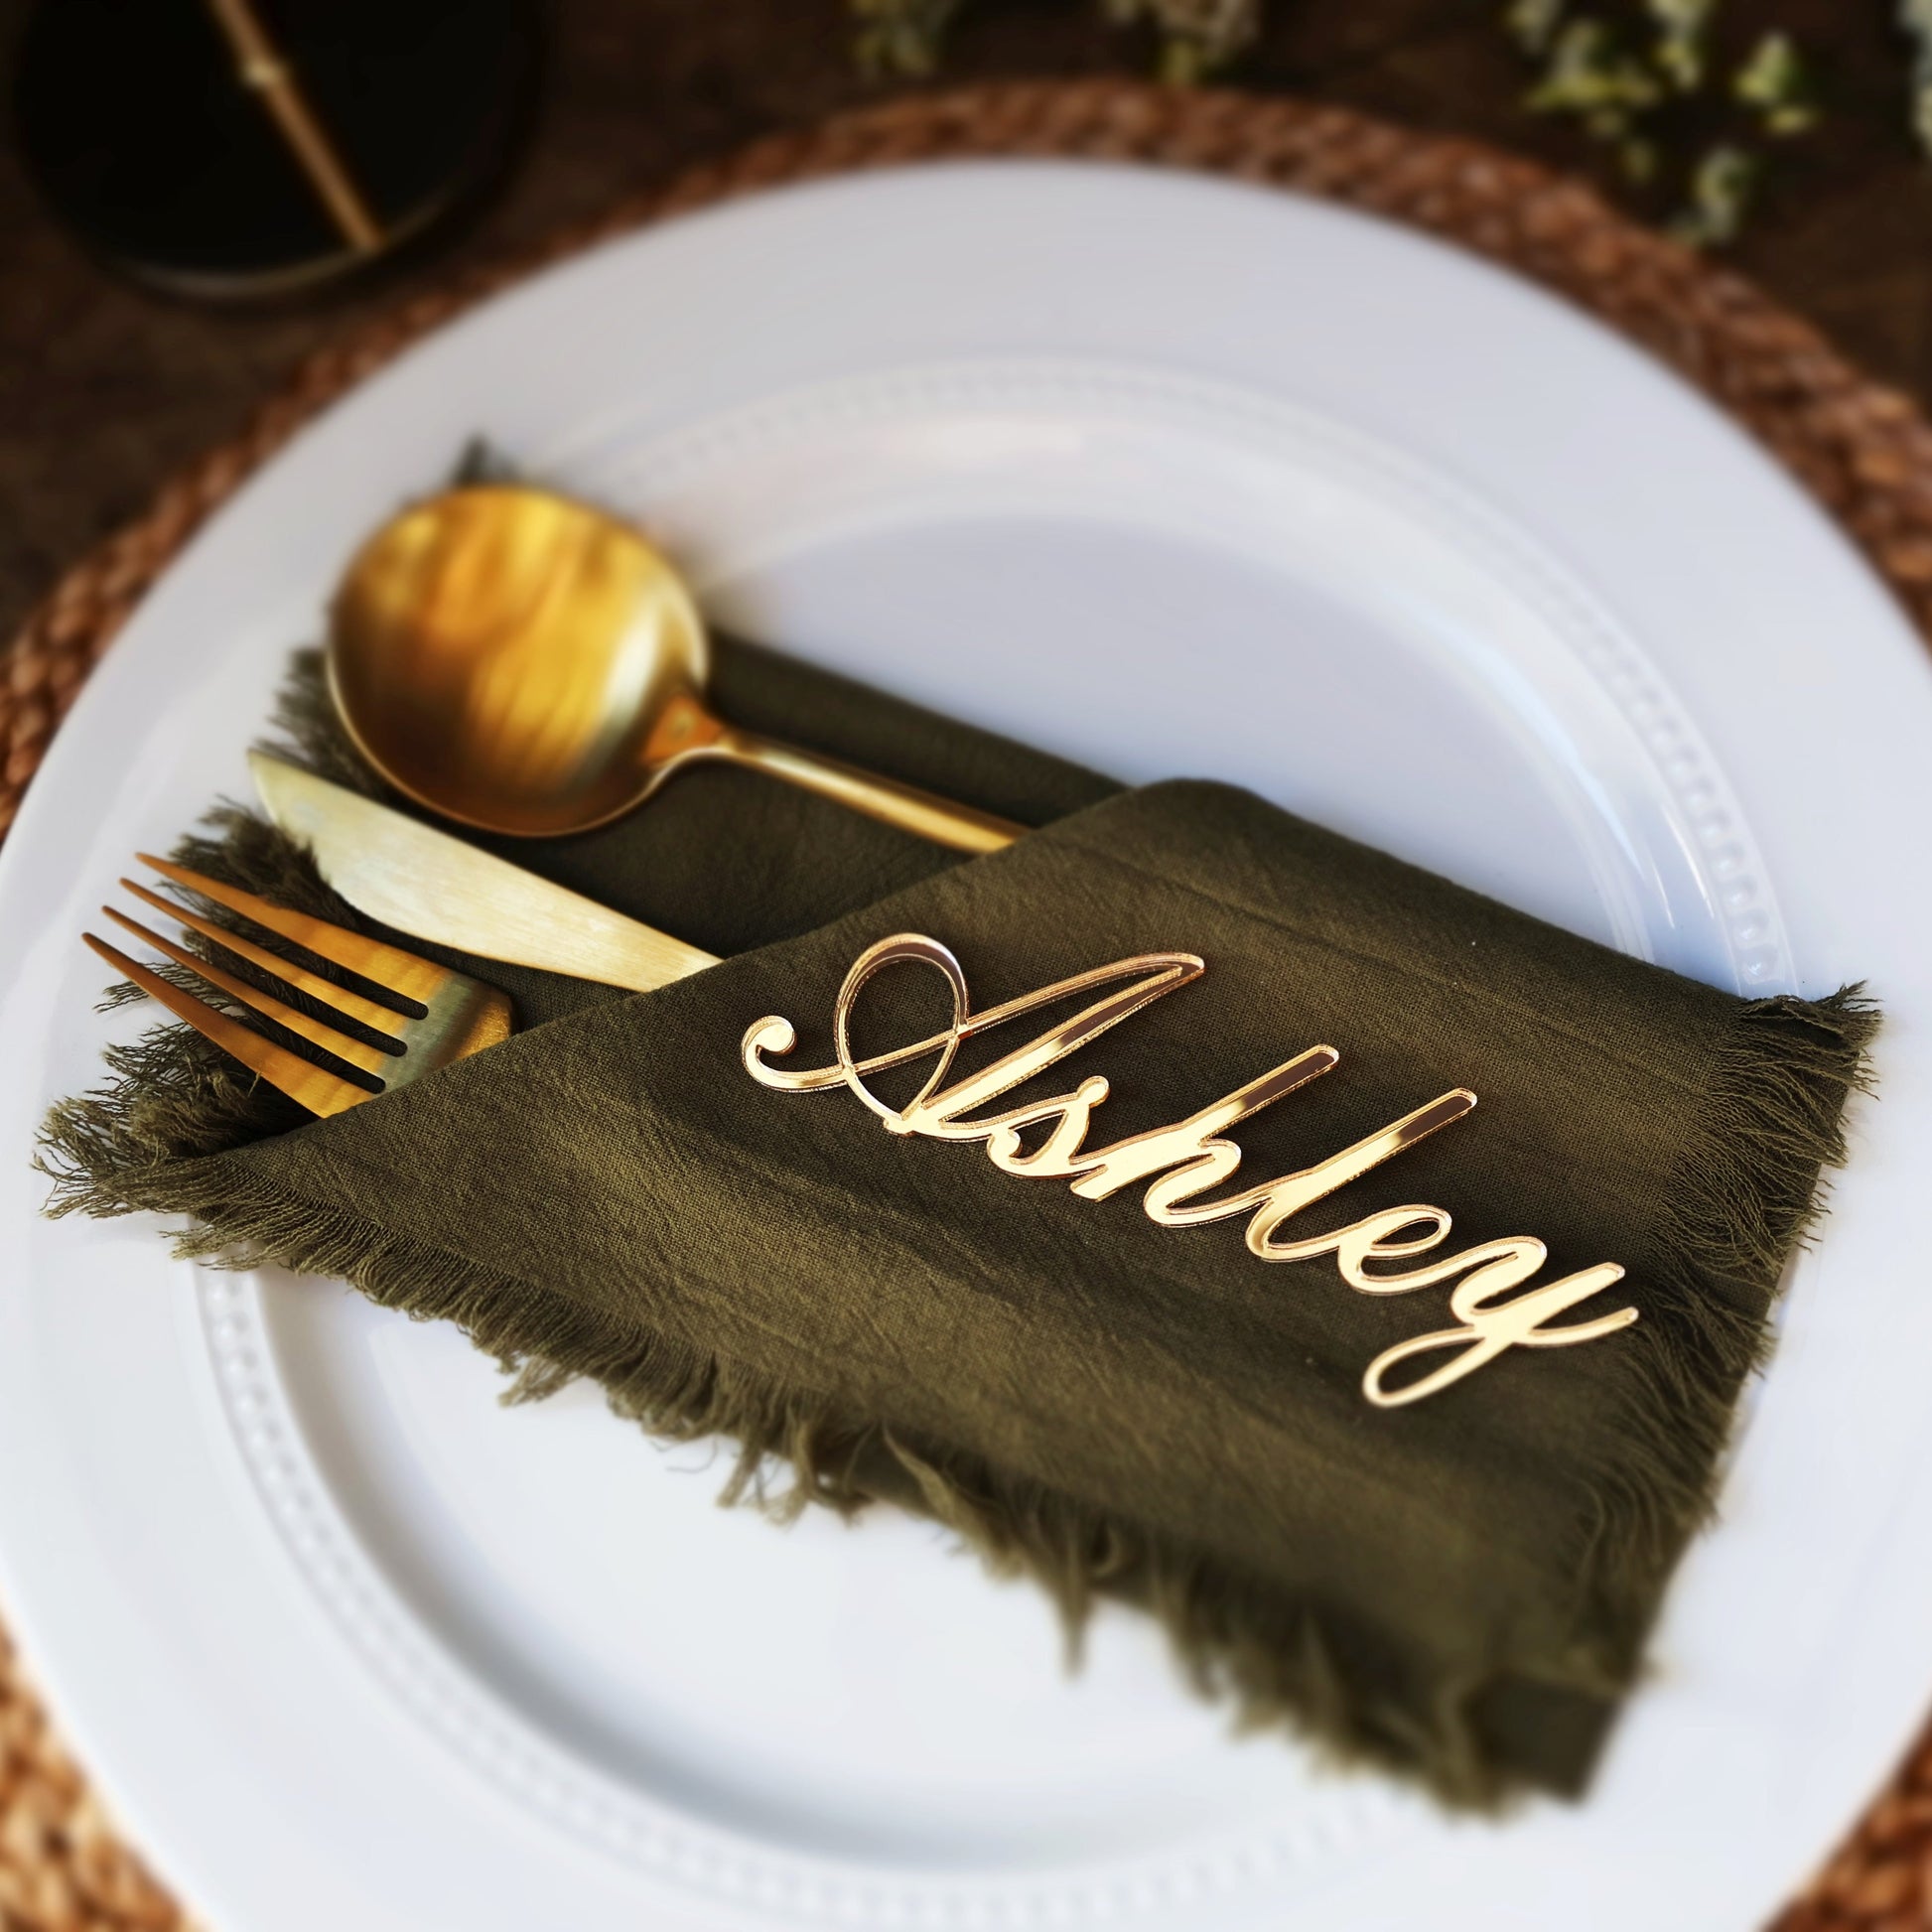 gold acrylic wedding name tags name tags wood name card name place cards name cards wedding name place setting wooden names wedding place cards bachelorette party wedding favors  wedding decor  name plate birthday rehersal dinner bridal shower